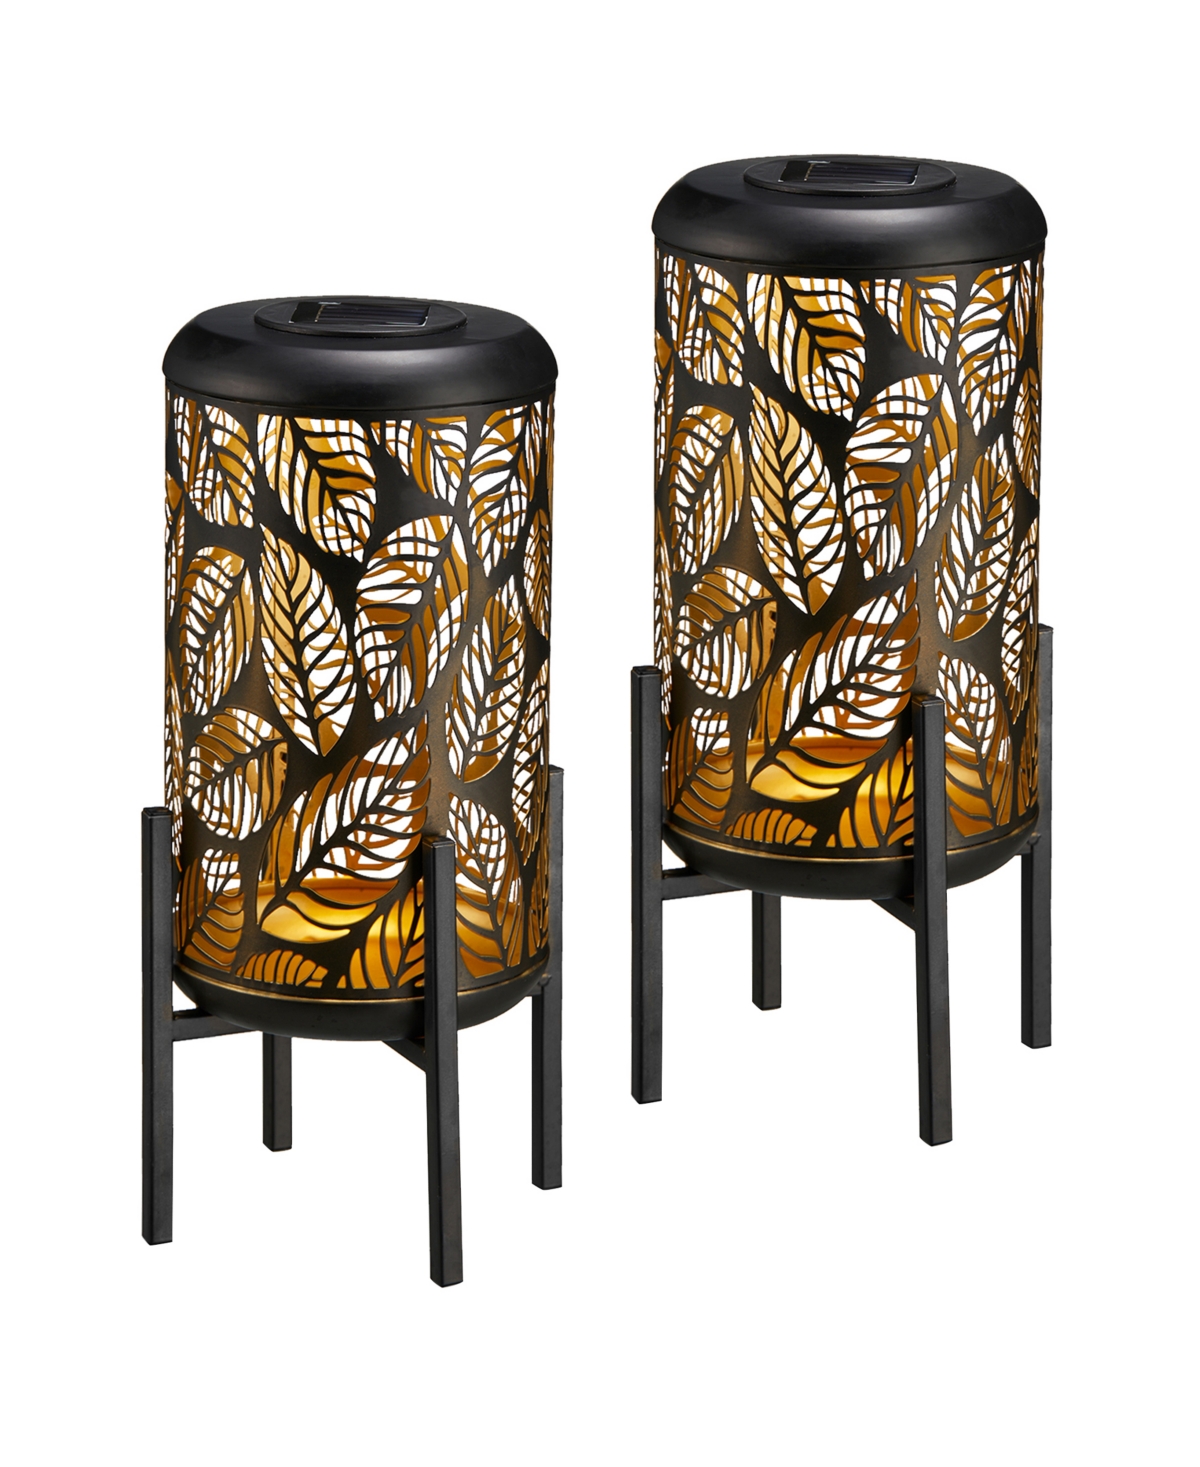 14.25" H Set of 2 Black and Gold-Tone Metal Cutout Leaves Pattern Solar Powered Led Outdoor Lantern with Stand - Multi